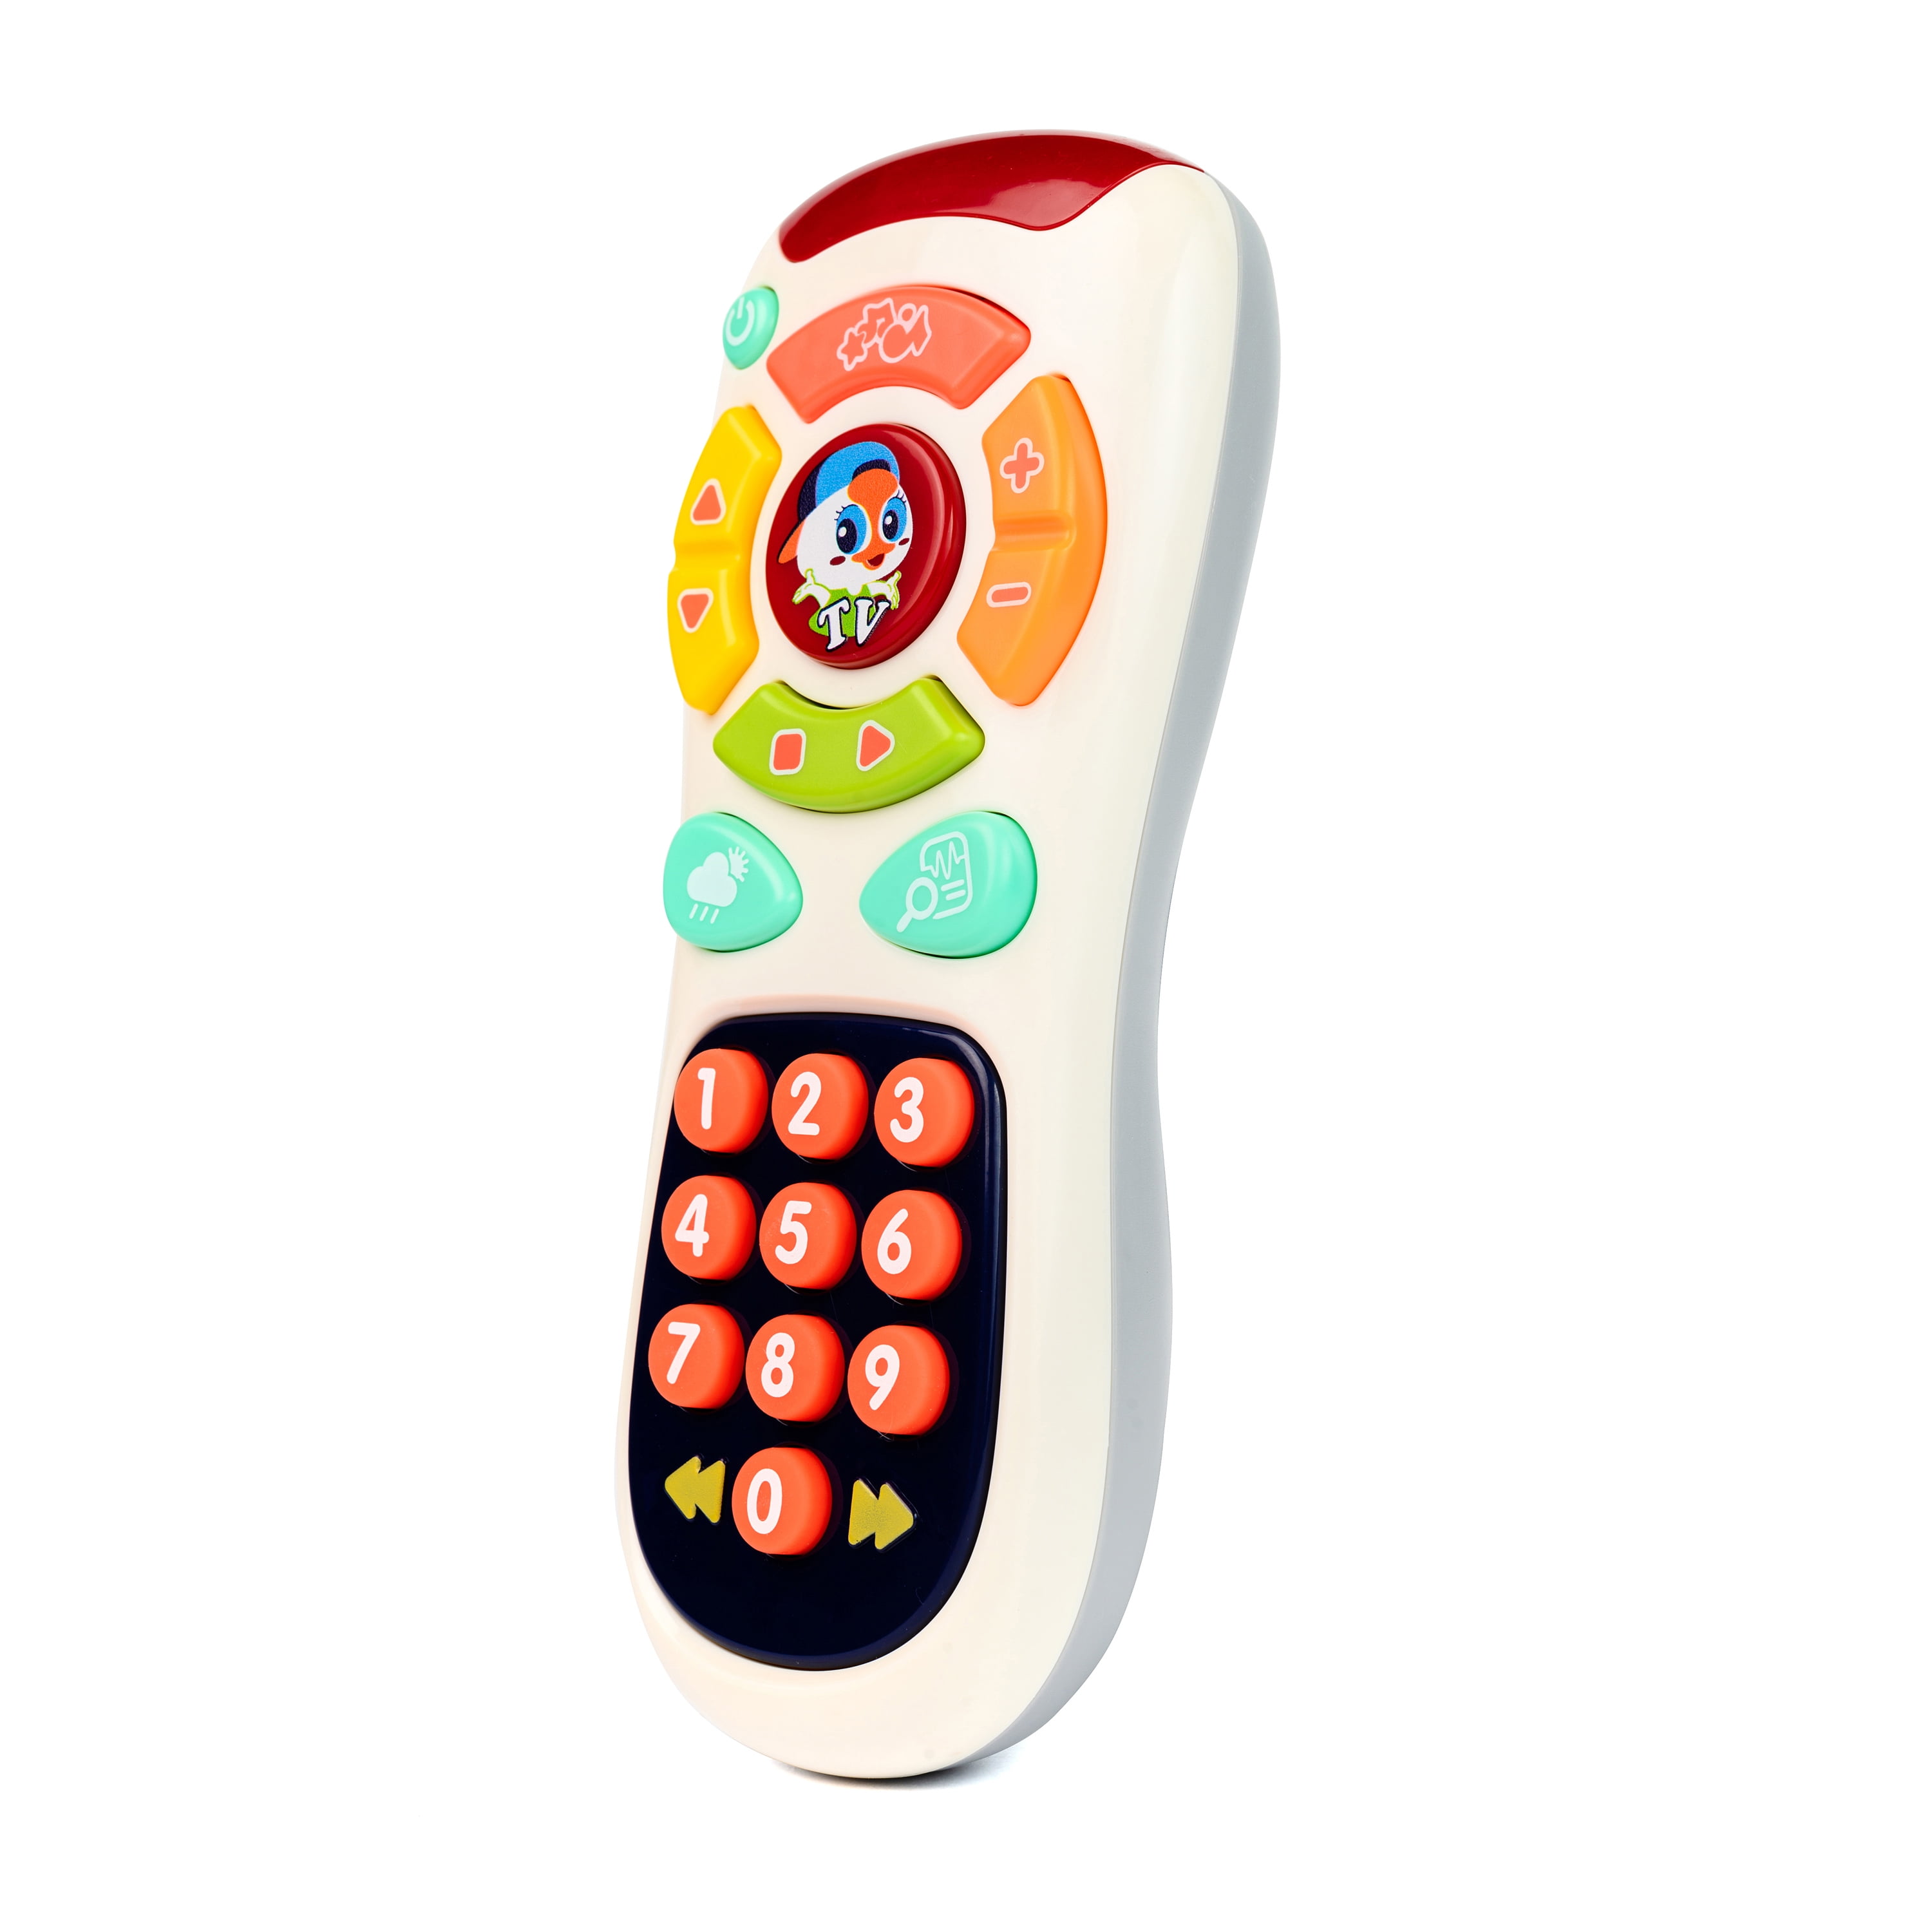 VTech Click and Count Remote 104b for sale online 